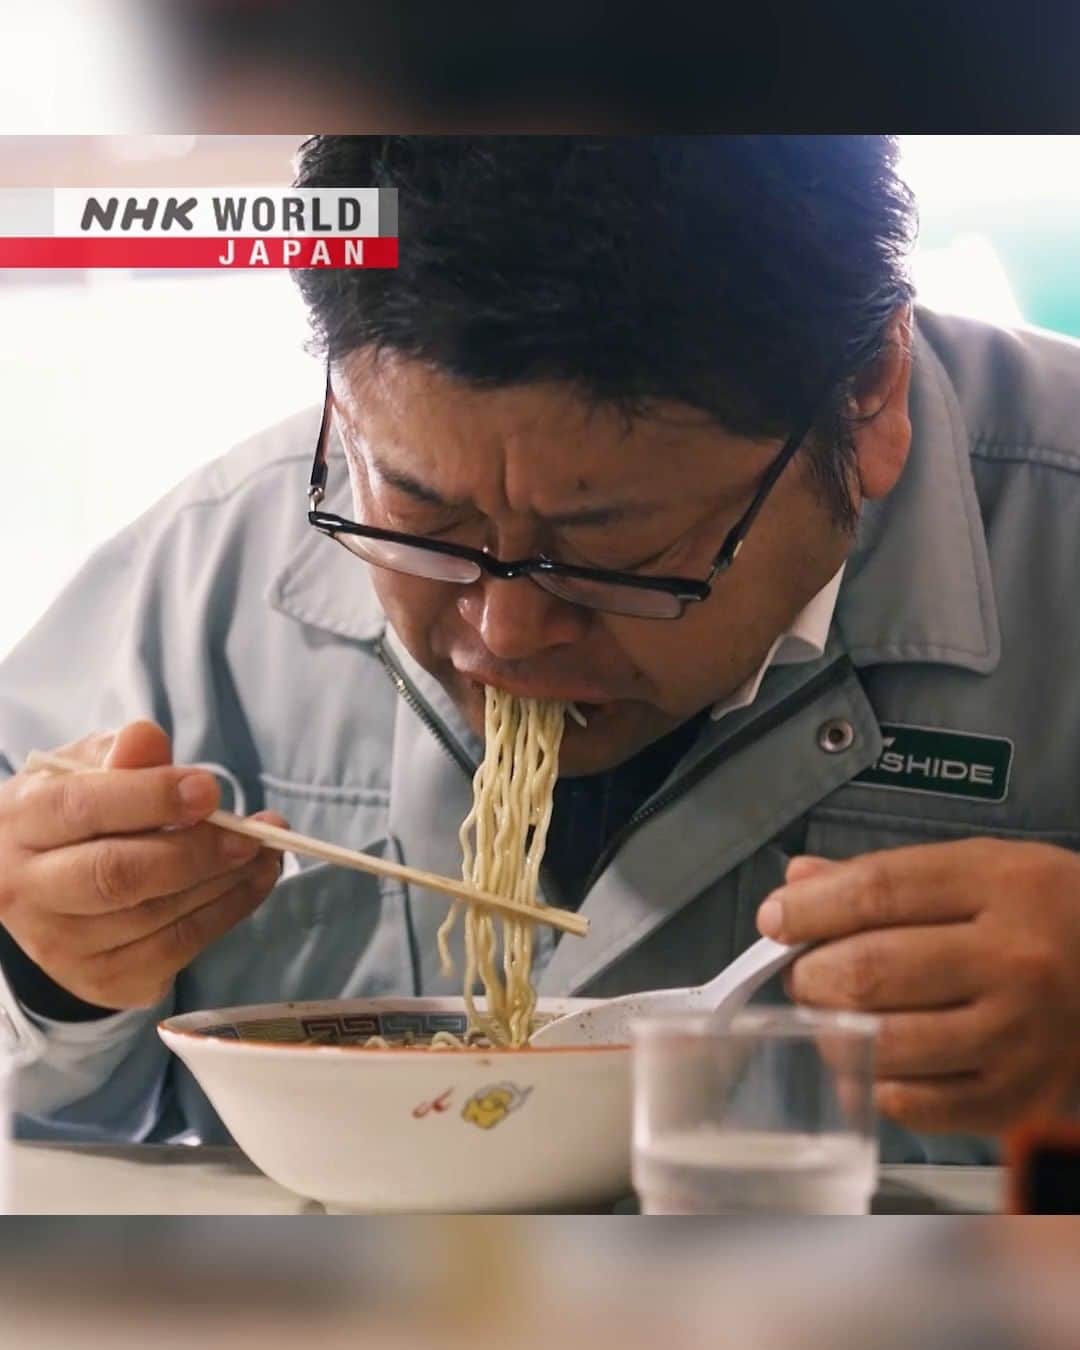 NHK「WORLD-JAPAN」のインスタグラム：「The ramen in Asahikawa, Japan’s coldest city, has a distinctively flavored double soup. 🍜🍜  It is a blend of tonkotsu and fish-based soups which is topped with hot pork fat.  The fat serves as kind of ‘lid’ to keep the ramen from getting cold. A plus in a city that once recorded Japan’s coldest ever temperature of -41℃ and regularly sees temperatures below -20℃.🥶 . 👉See more about this local favorite｜Watch｜RAMEN JAPAN - Hokkaido Part 2｜Free On Demand｜NHK WORLD-JAPAN website.👀 . 👉Tap in Stories/Highlights to get there.👆 . 👉Follow the link in our bio for more on the latest from Japan. . 👉If we’re on your Favorites list you won’t miss a post. . . #ramensoup #soupstock #asahikawaramen #slurpingramen #ラーメン #拉麺 #ramen #ramenlover #japanesefood #ramennoodles #noodles #japanesecooking #japaneseramen #cooking #asahikawa #hokkaido #japan #nhkworldjapan」